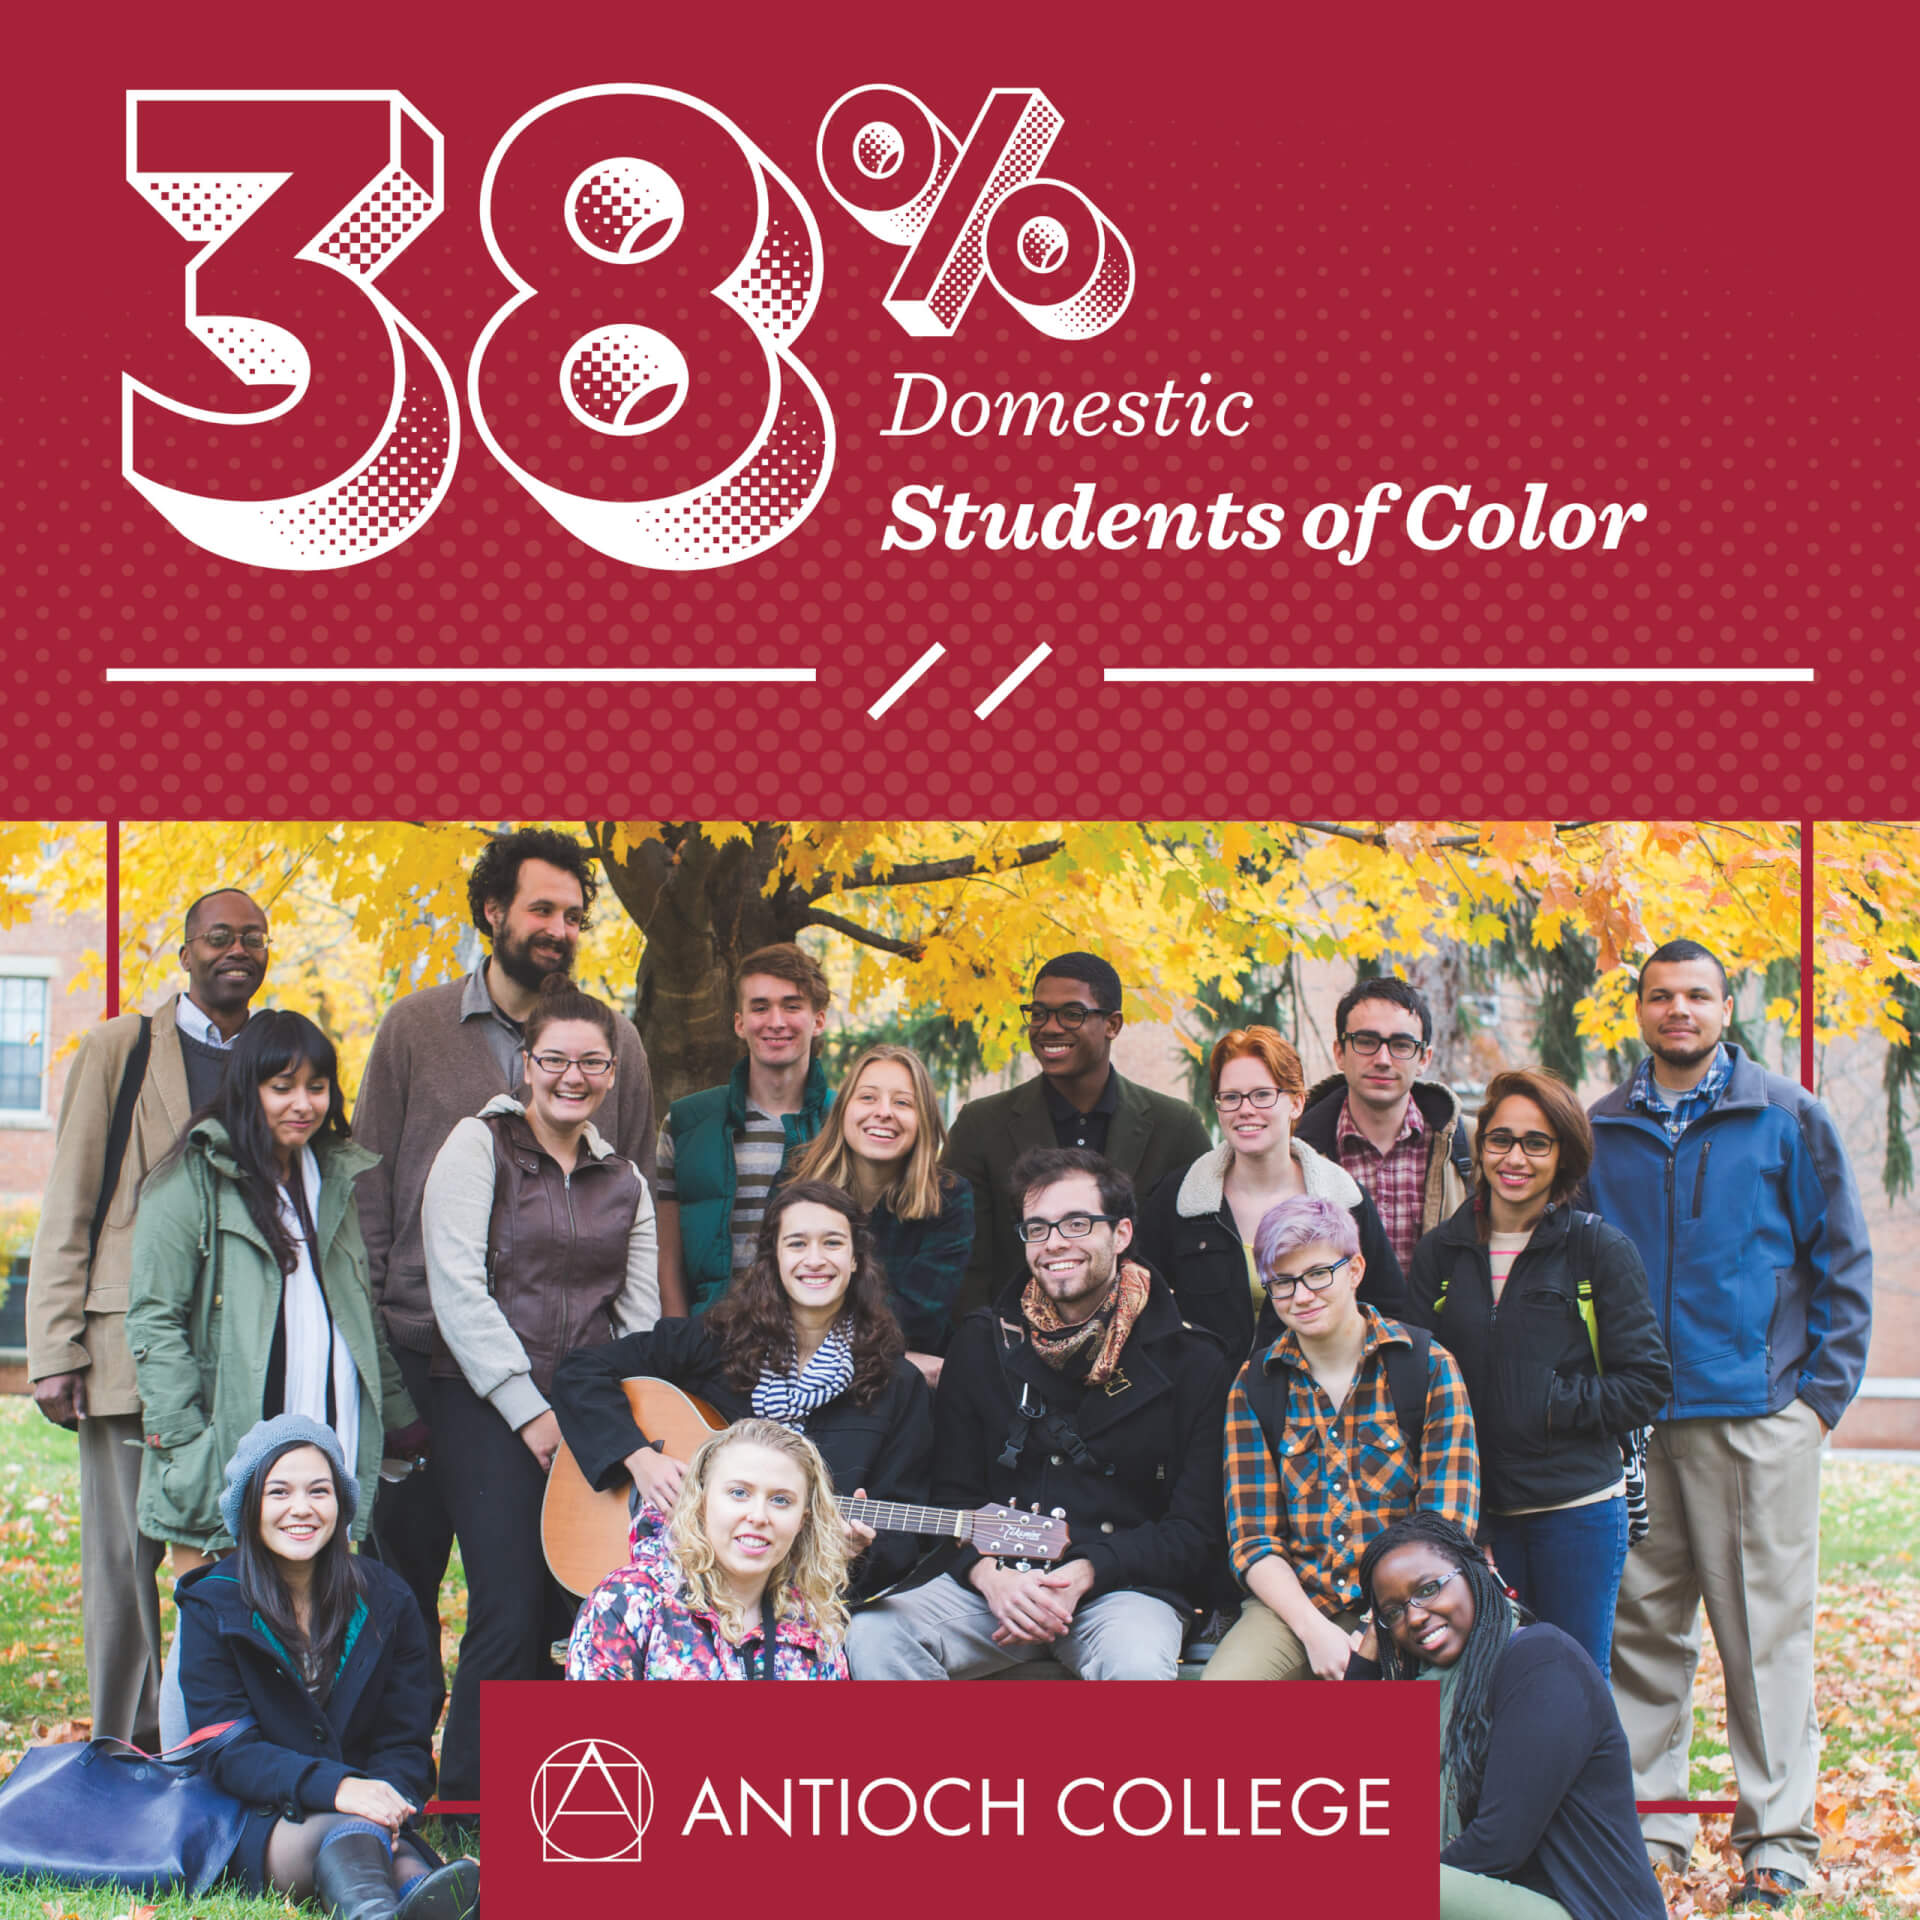 38% Domestic Students of Color